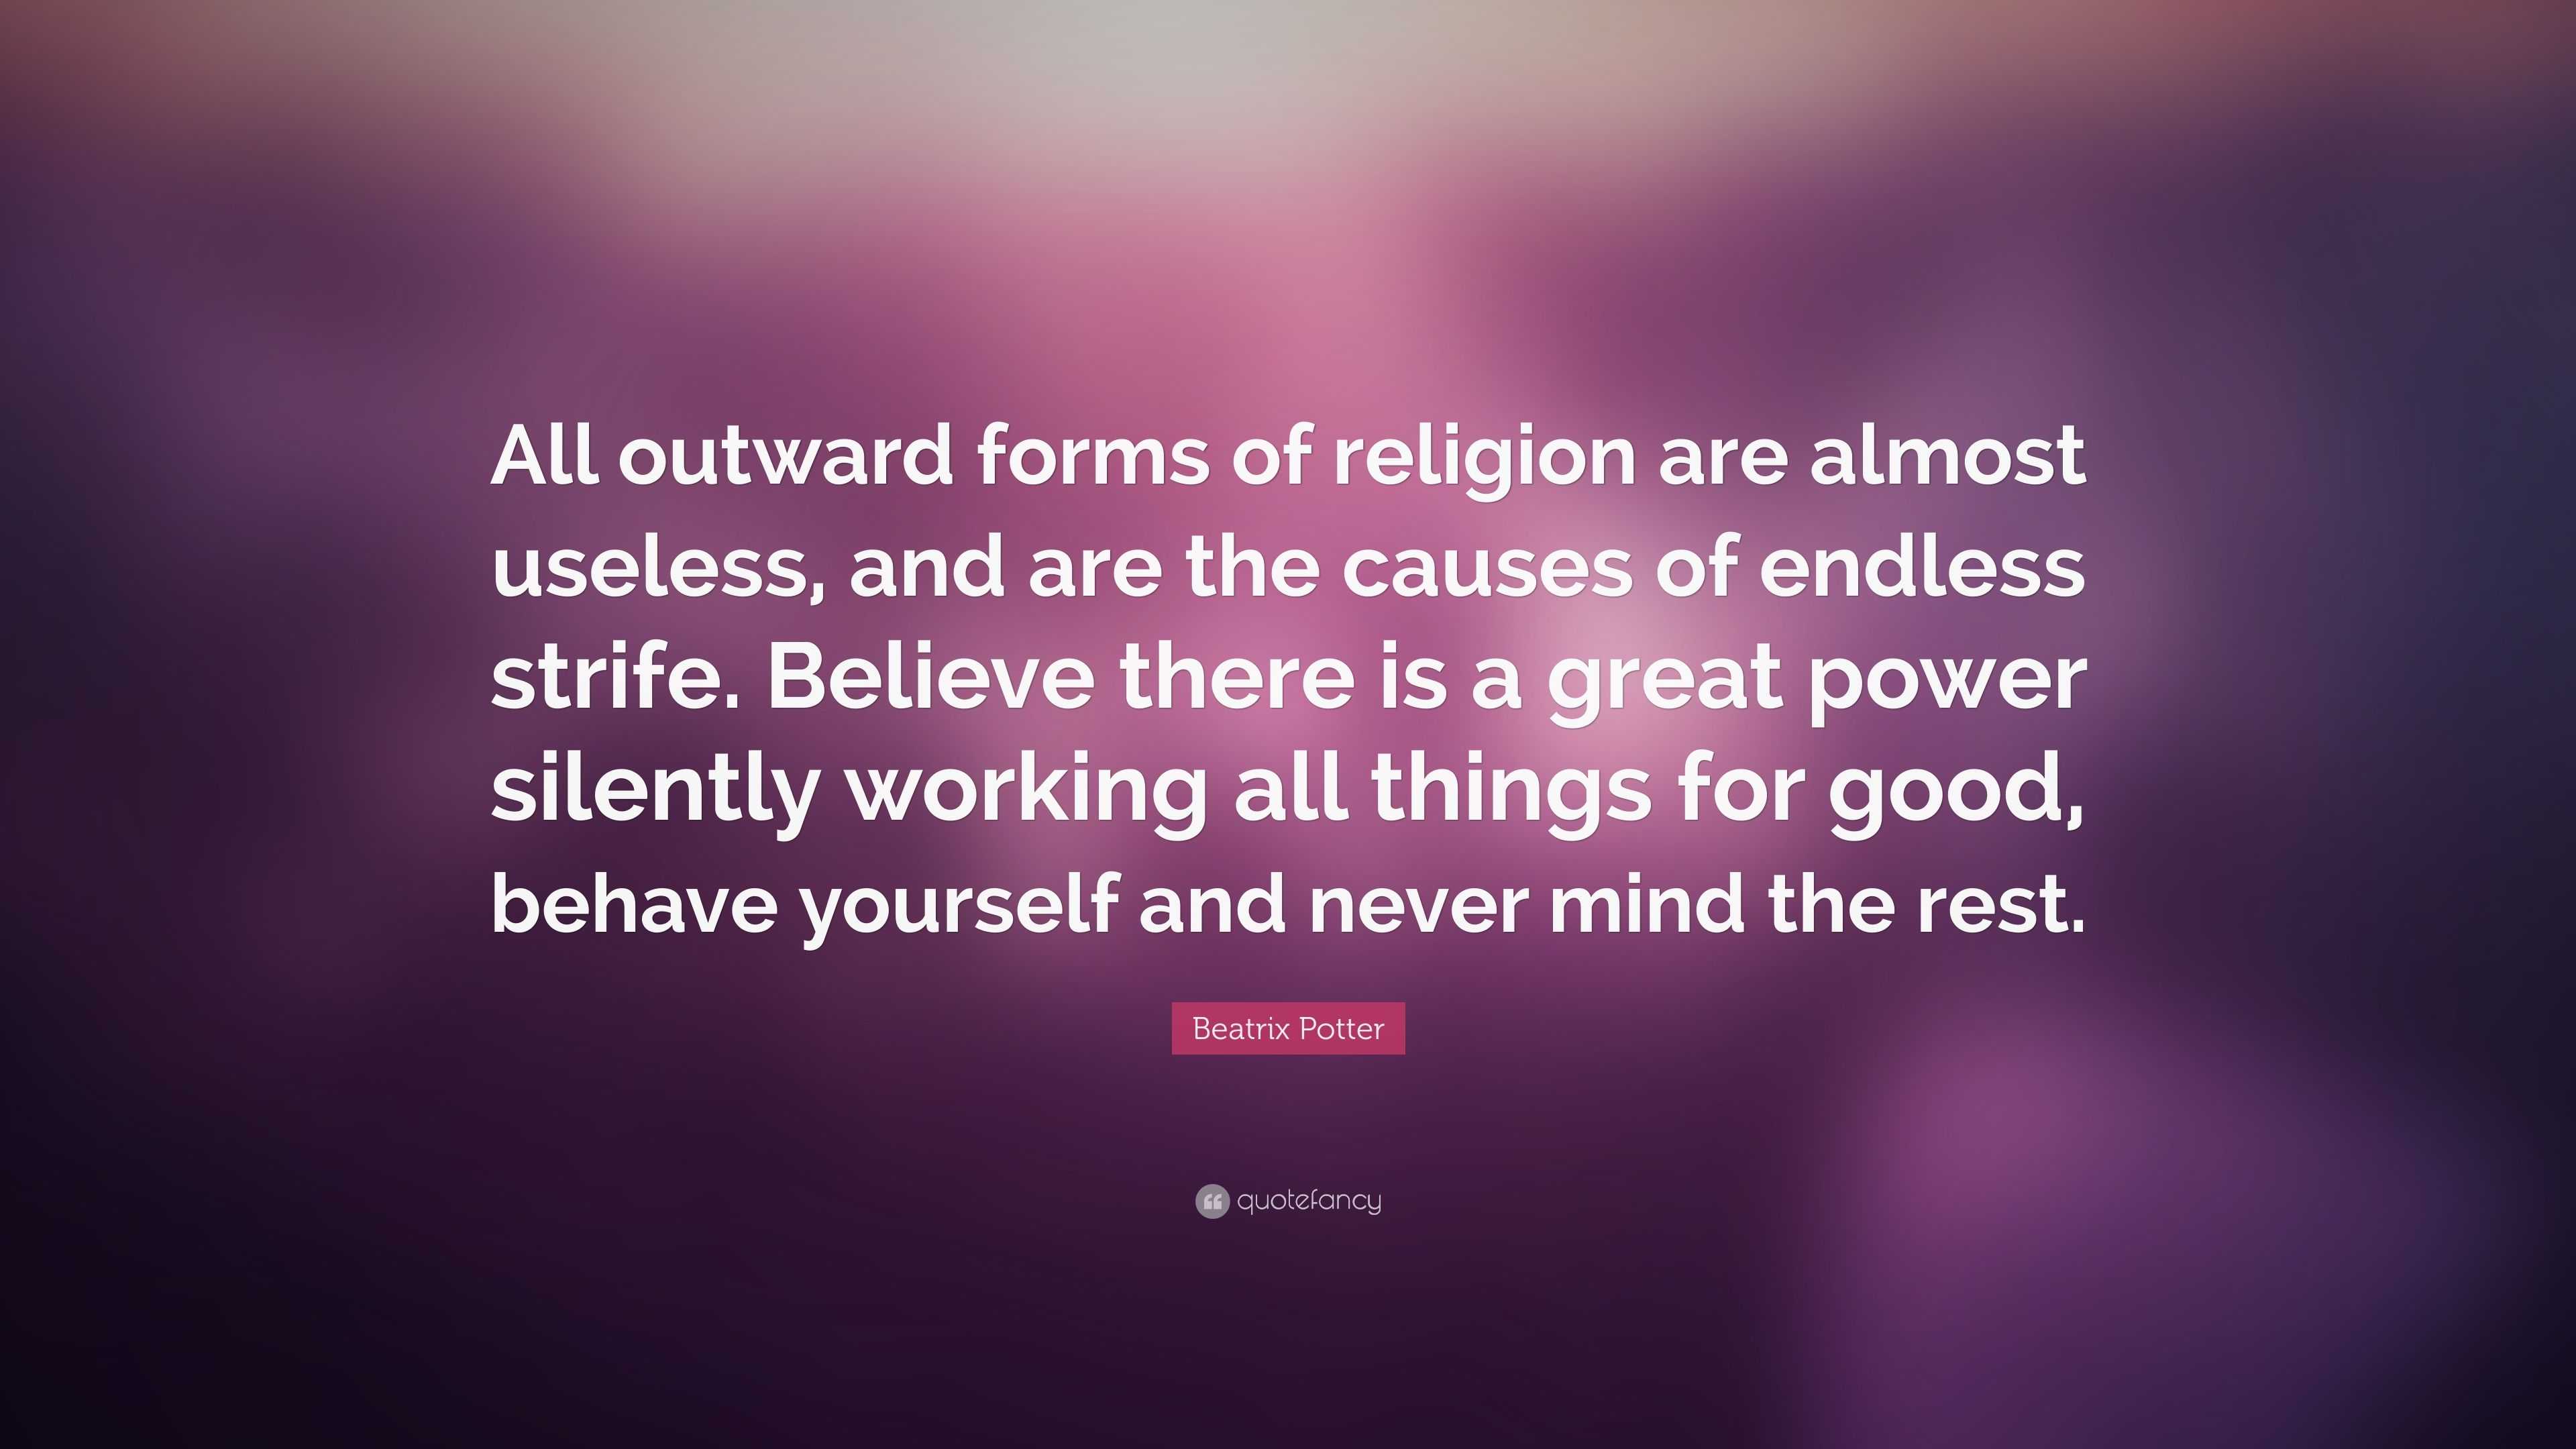 Beatrix Potter Quote: “All outward forms of religion are almost useless ...